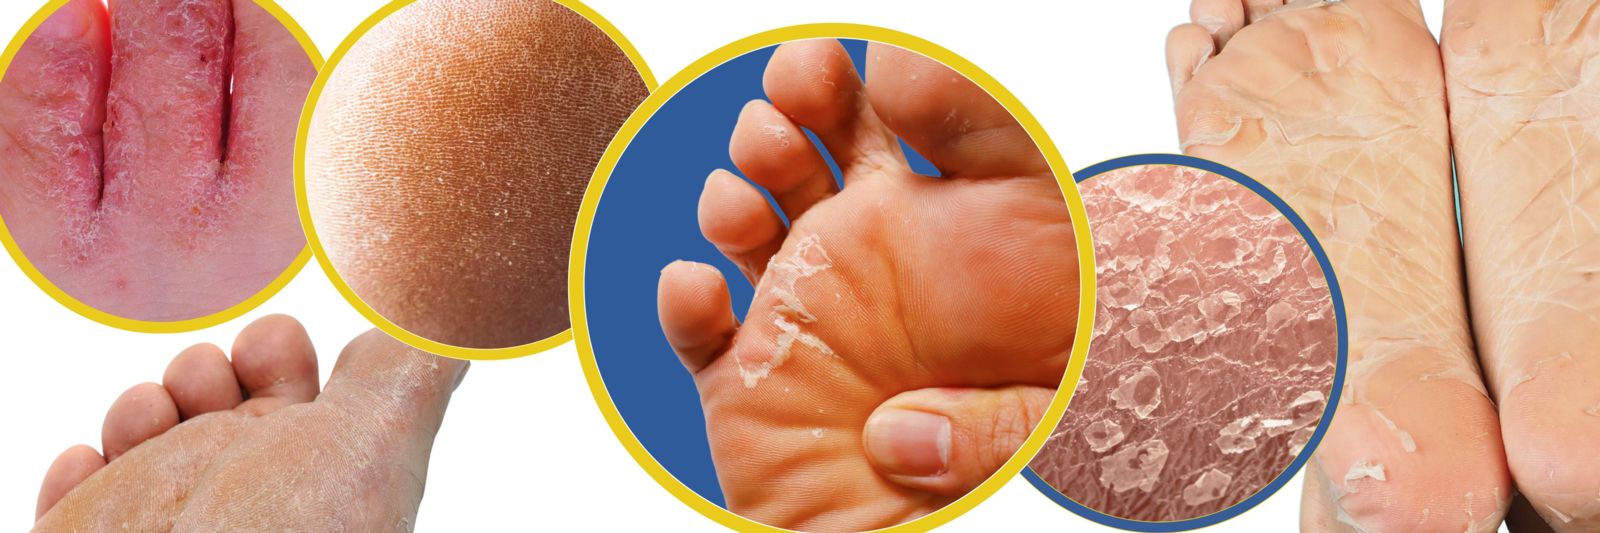 Understanding Peeling Feet: From Causes to Self-Care Tips